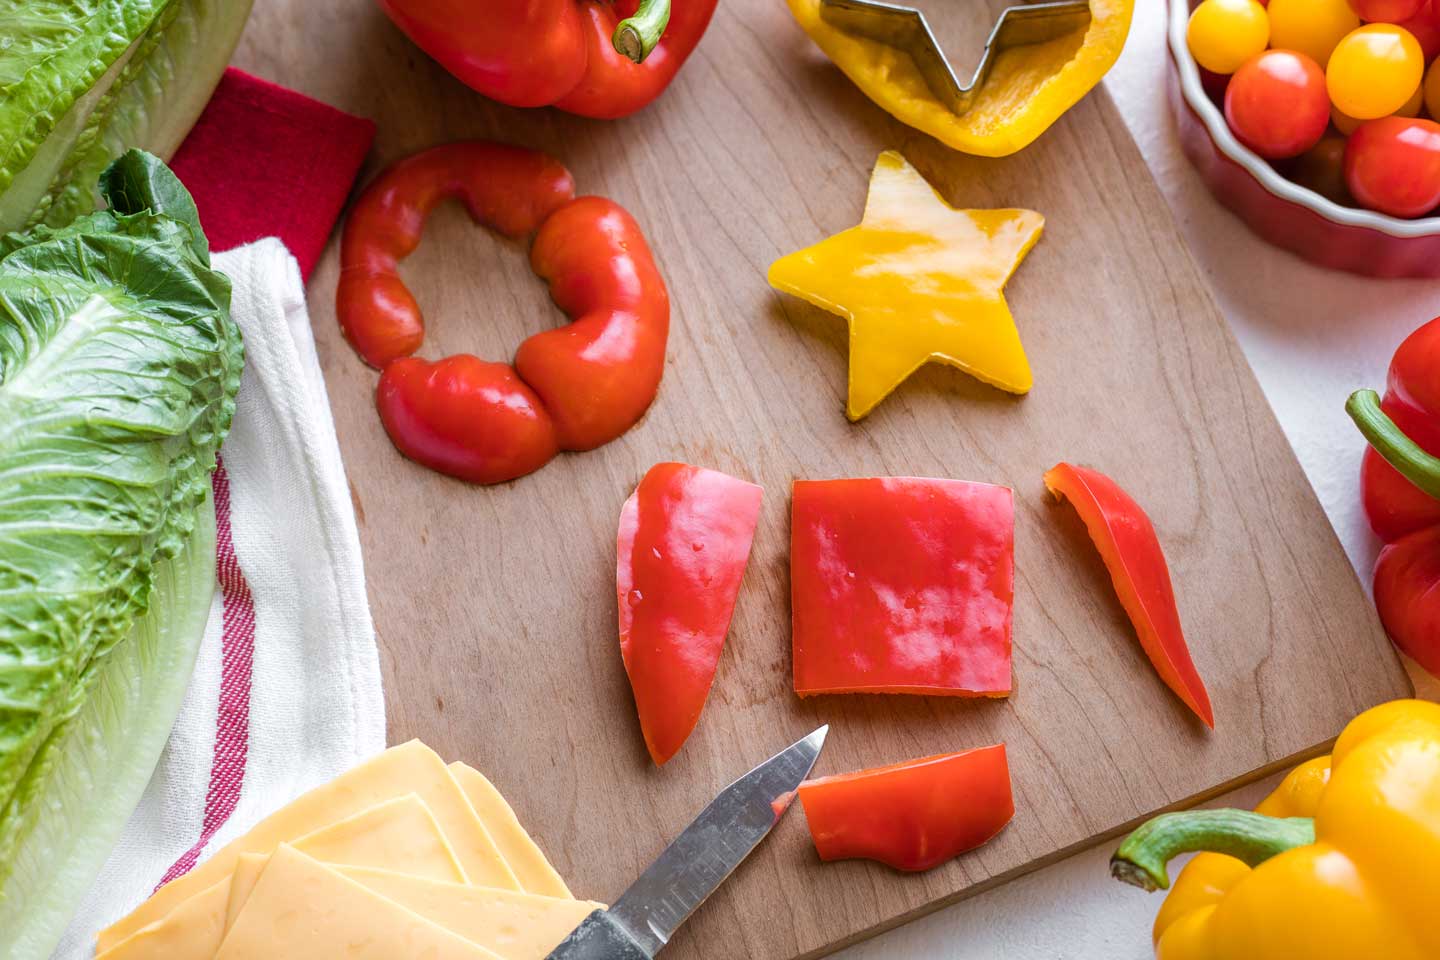 large piece of red bell pepper being cut with a paring knife into a square, ready to become a "present" under the "Christmas tree" salad